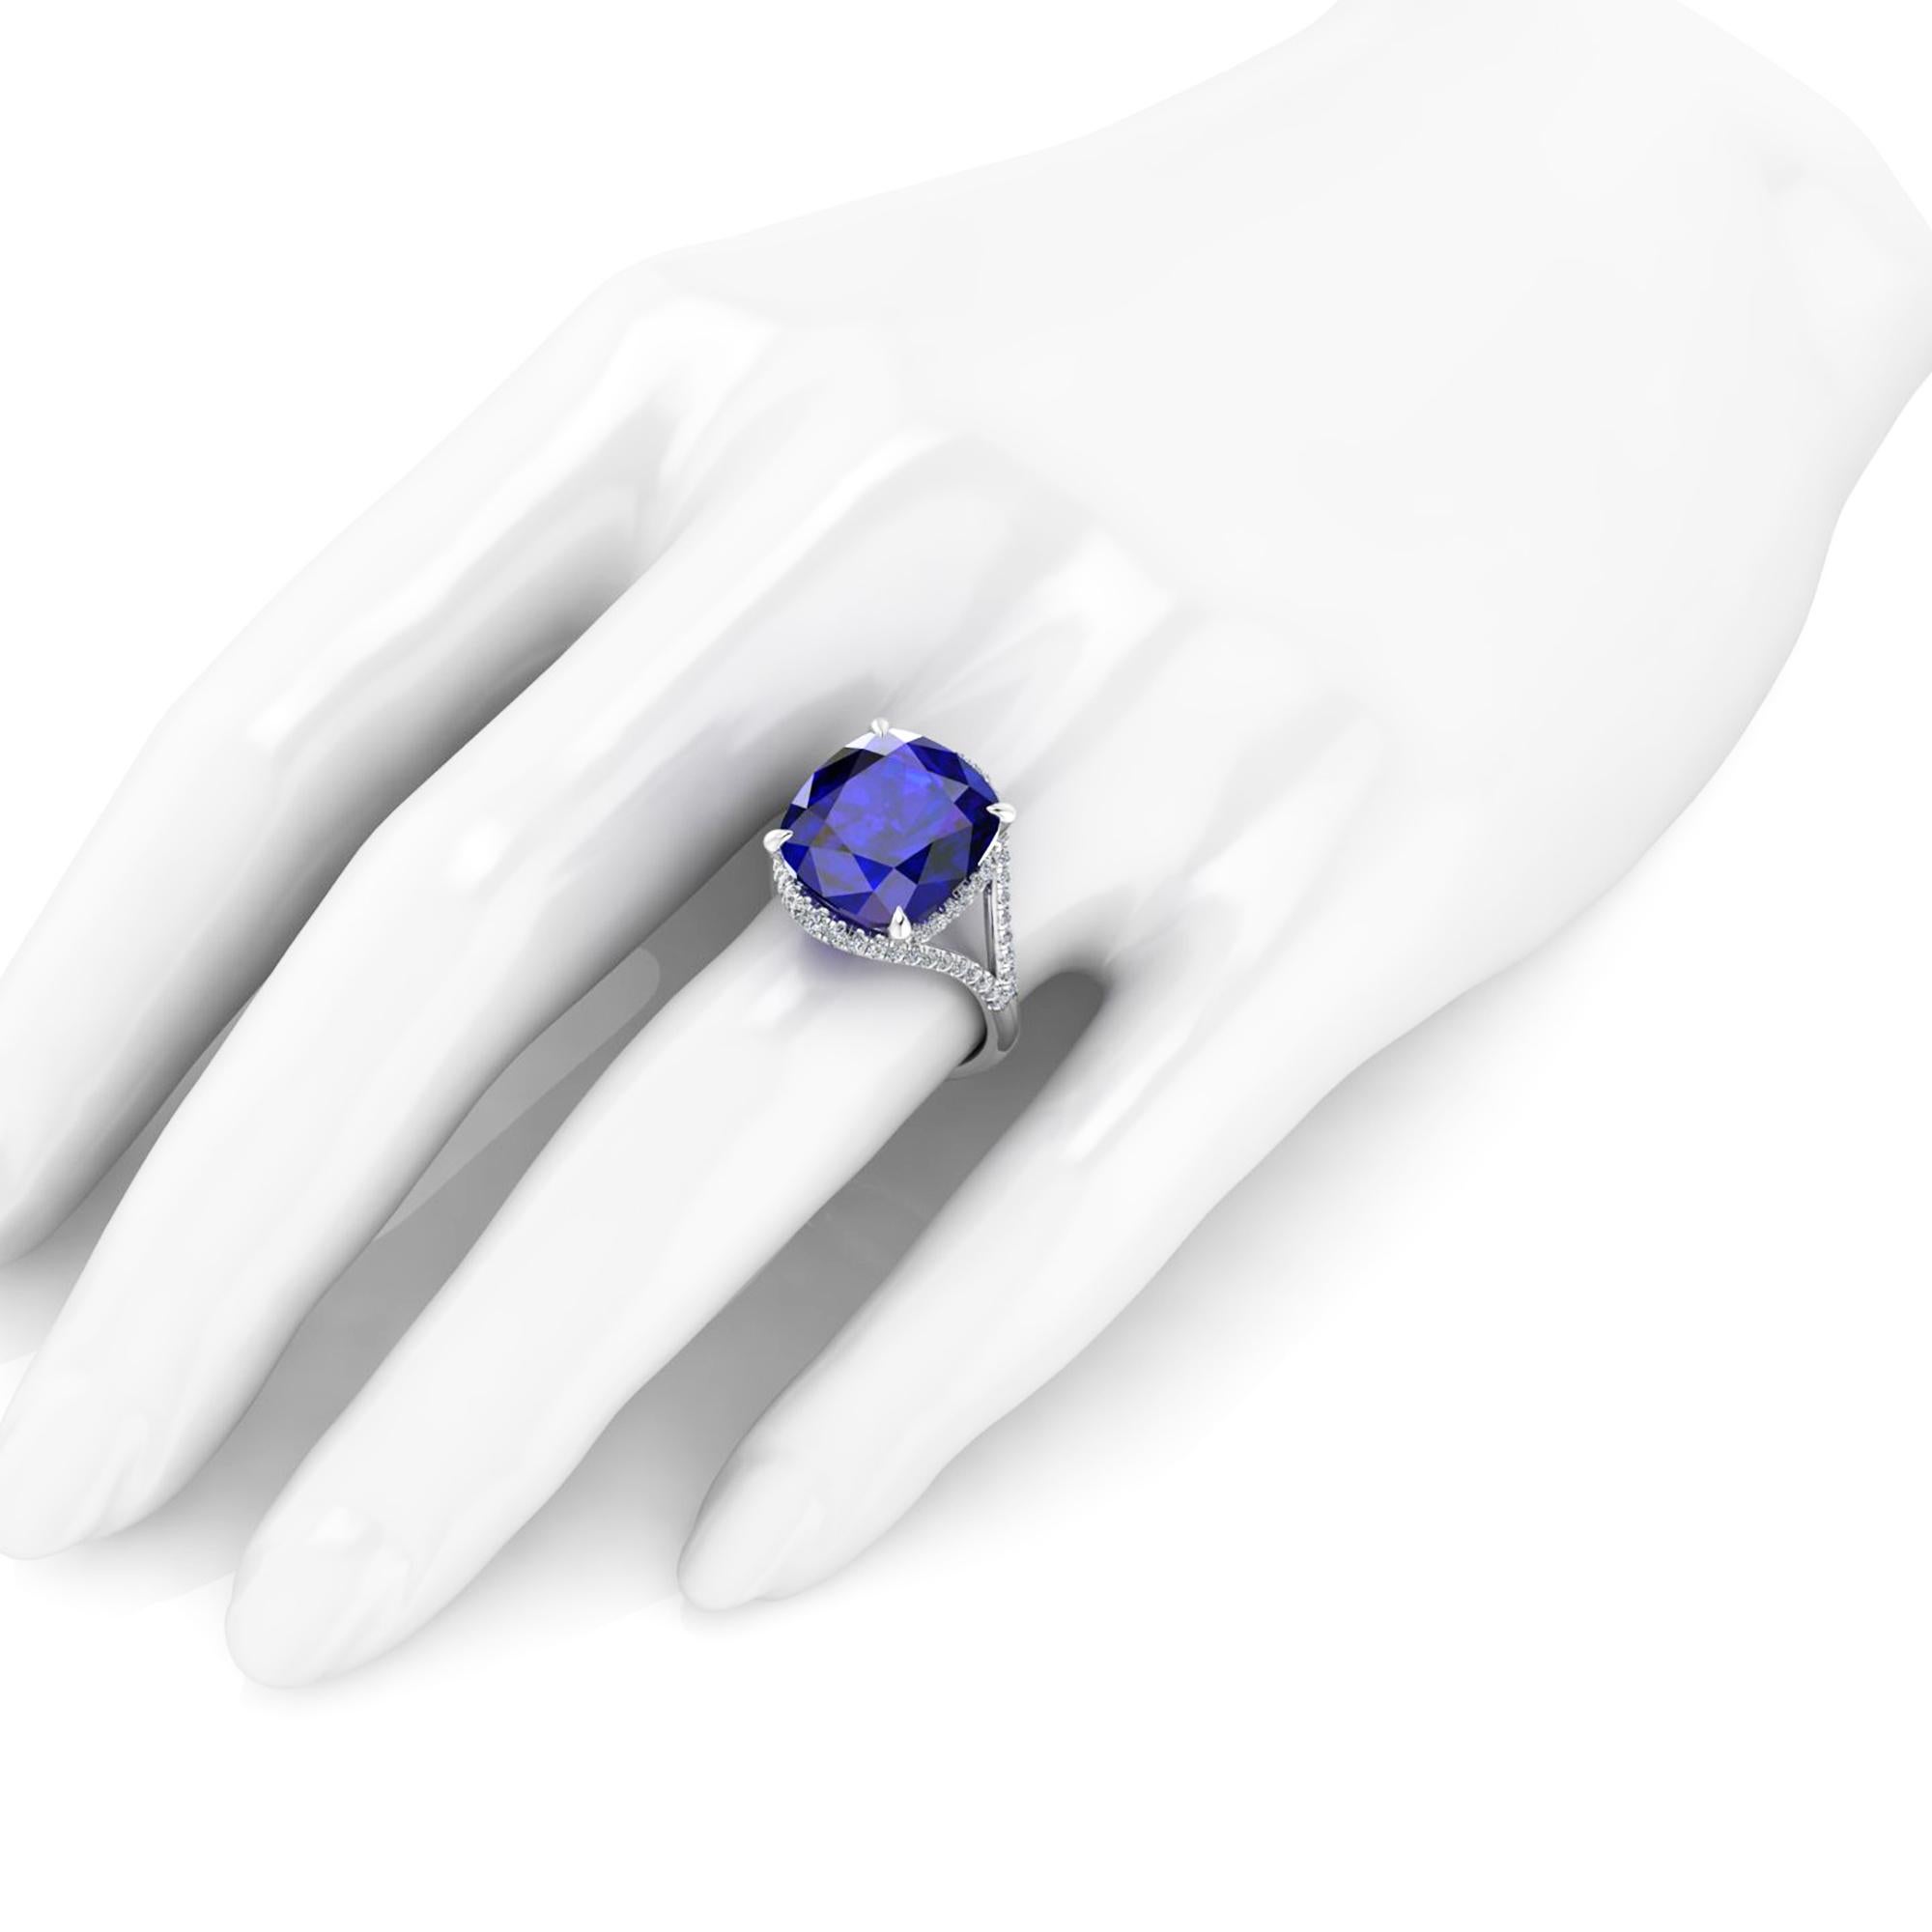 9.23 carat deep blue Tanzinite  GIA Certified, in a one of a kind, hand made Platinum 950, adorned by 0.60 carats of white diamonds pave, designed and conceived in New York City. 
This ring is made to order to guarantee the absolute immaculate